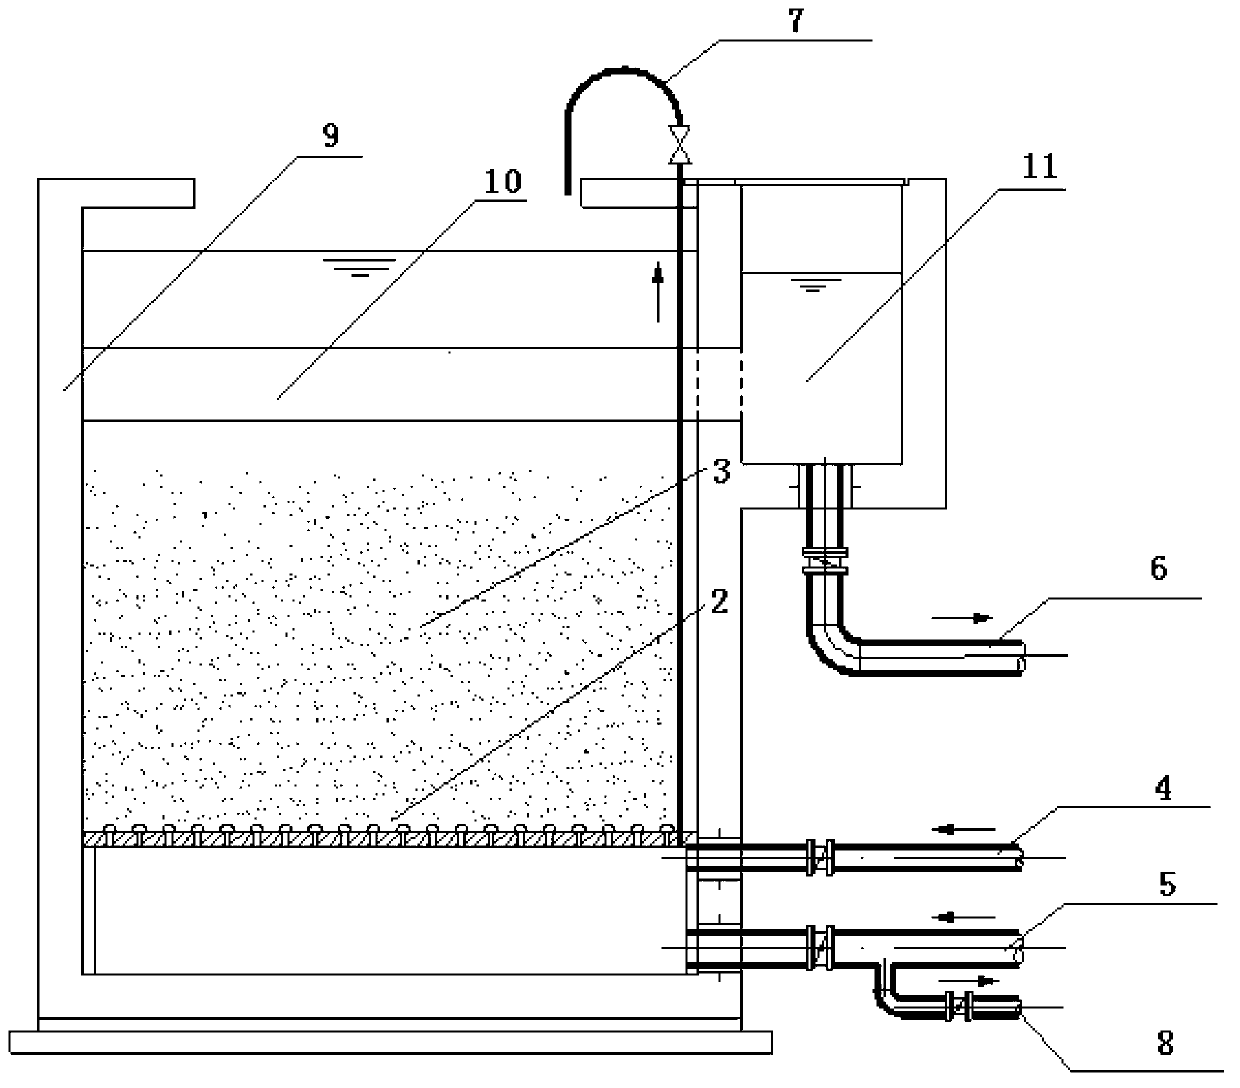 Device, structure and process for processing ammonia-nitrogen sewage by aeration zeolite fluidized bed